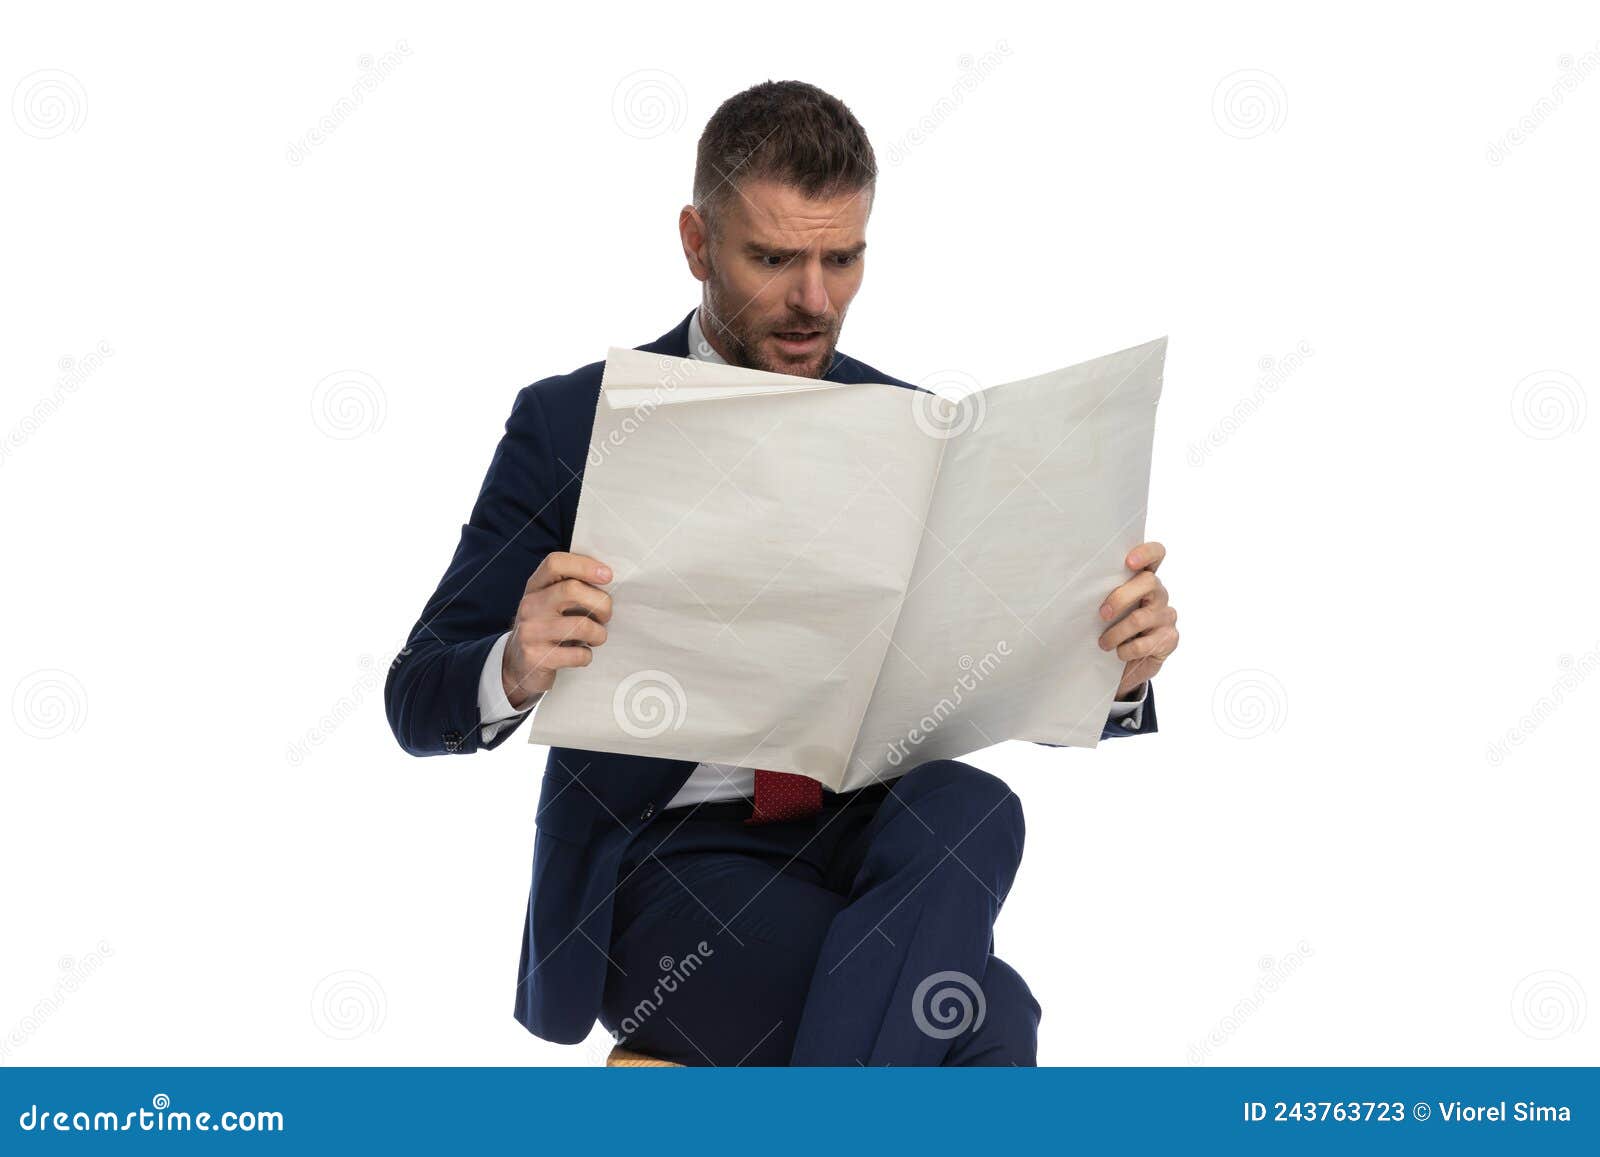 astounded man in his 40s reading newspaper and being shocked